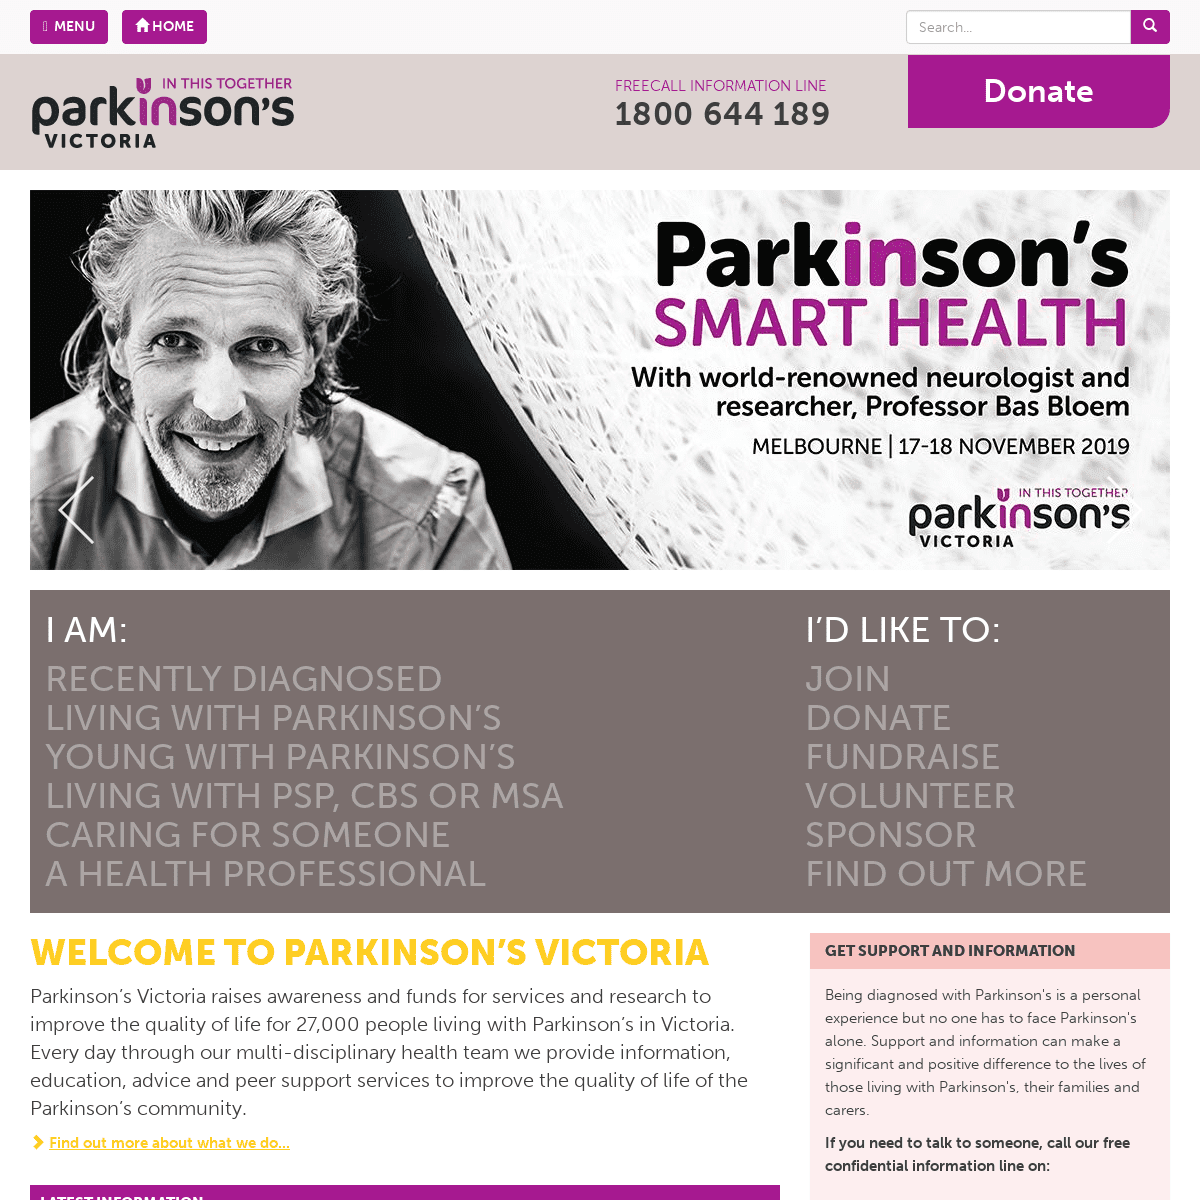 Parkinson’s Victoria – We’re in this together